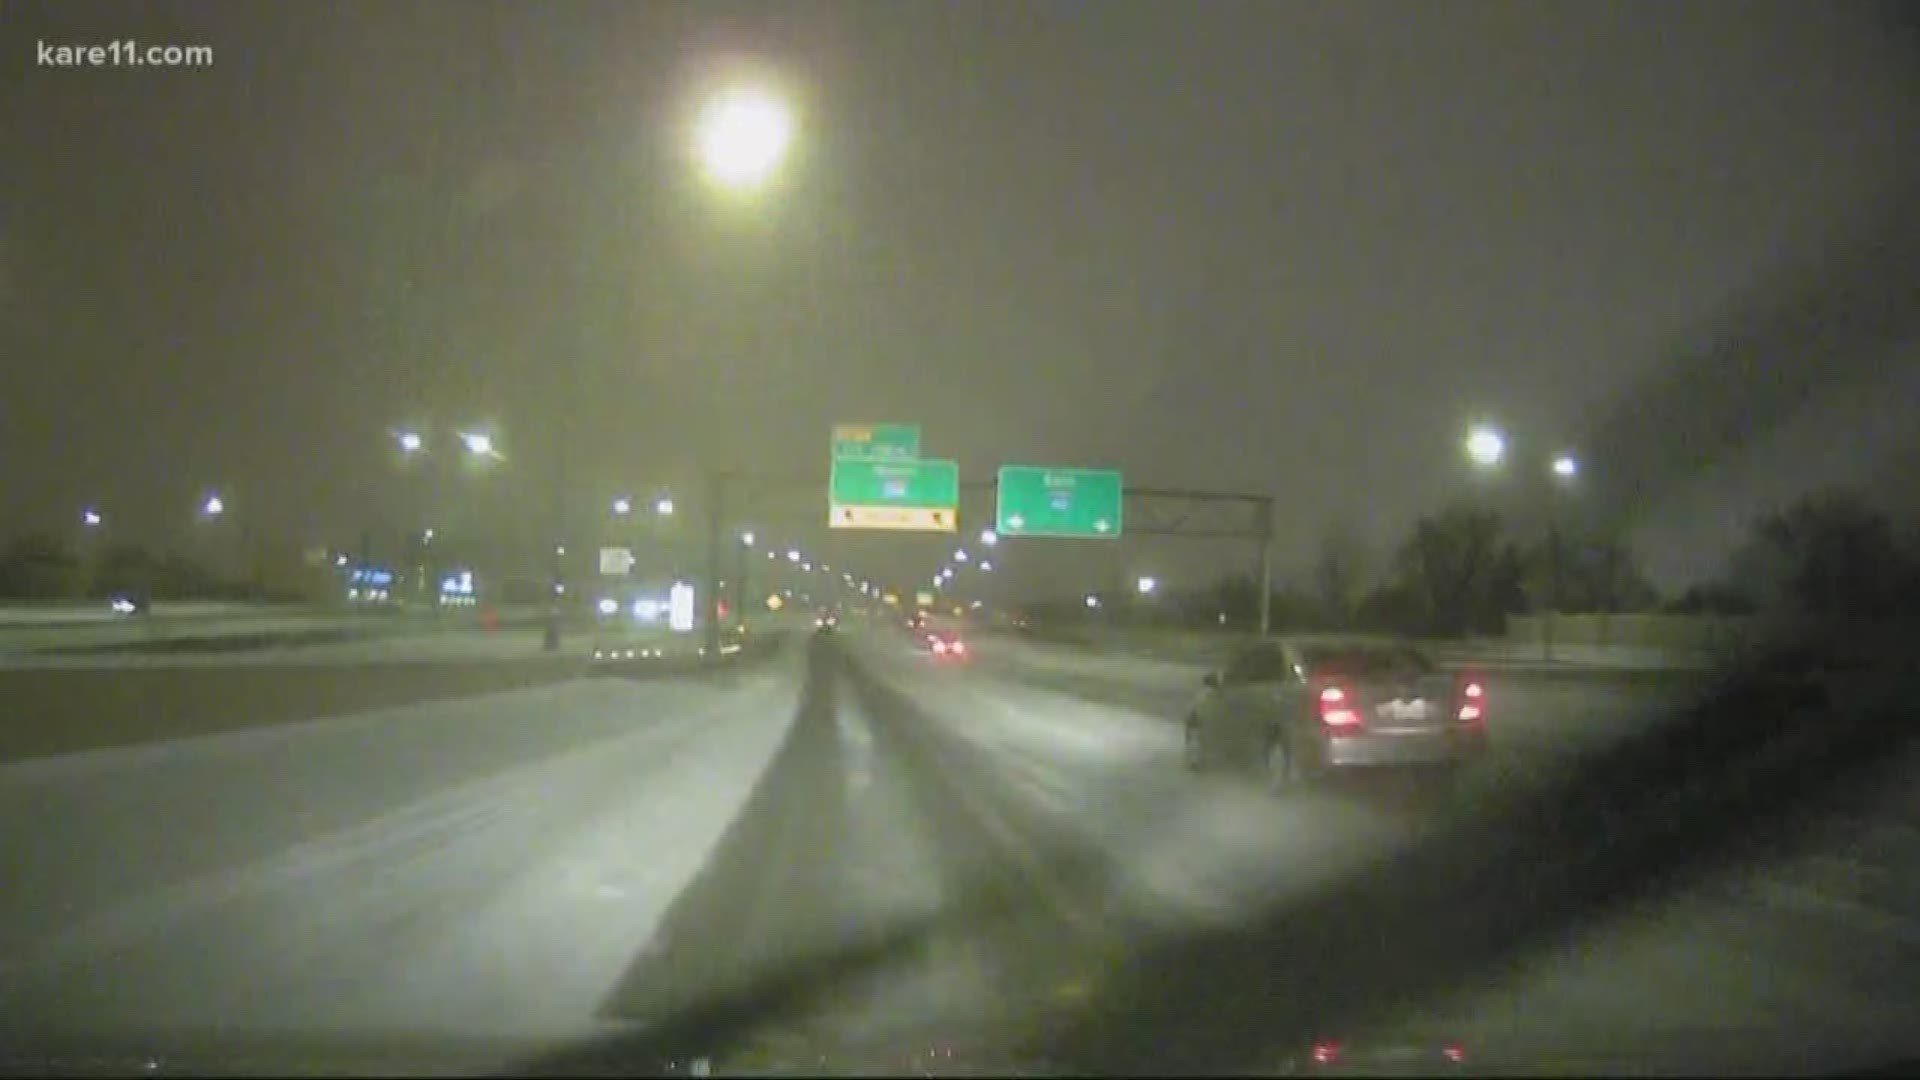 Snow and ice slowed traffic to a crawl during the Tuesday evening rush hour in the metro, leading to dozens of crashes and hours-long commutes for many.